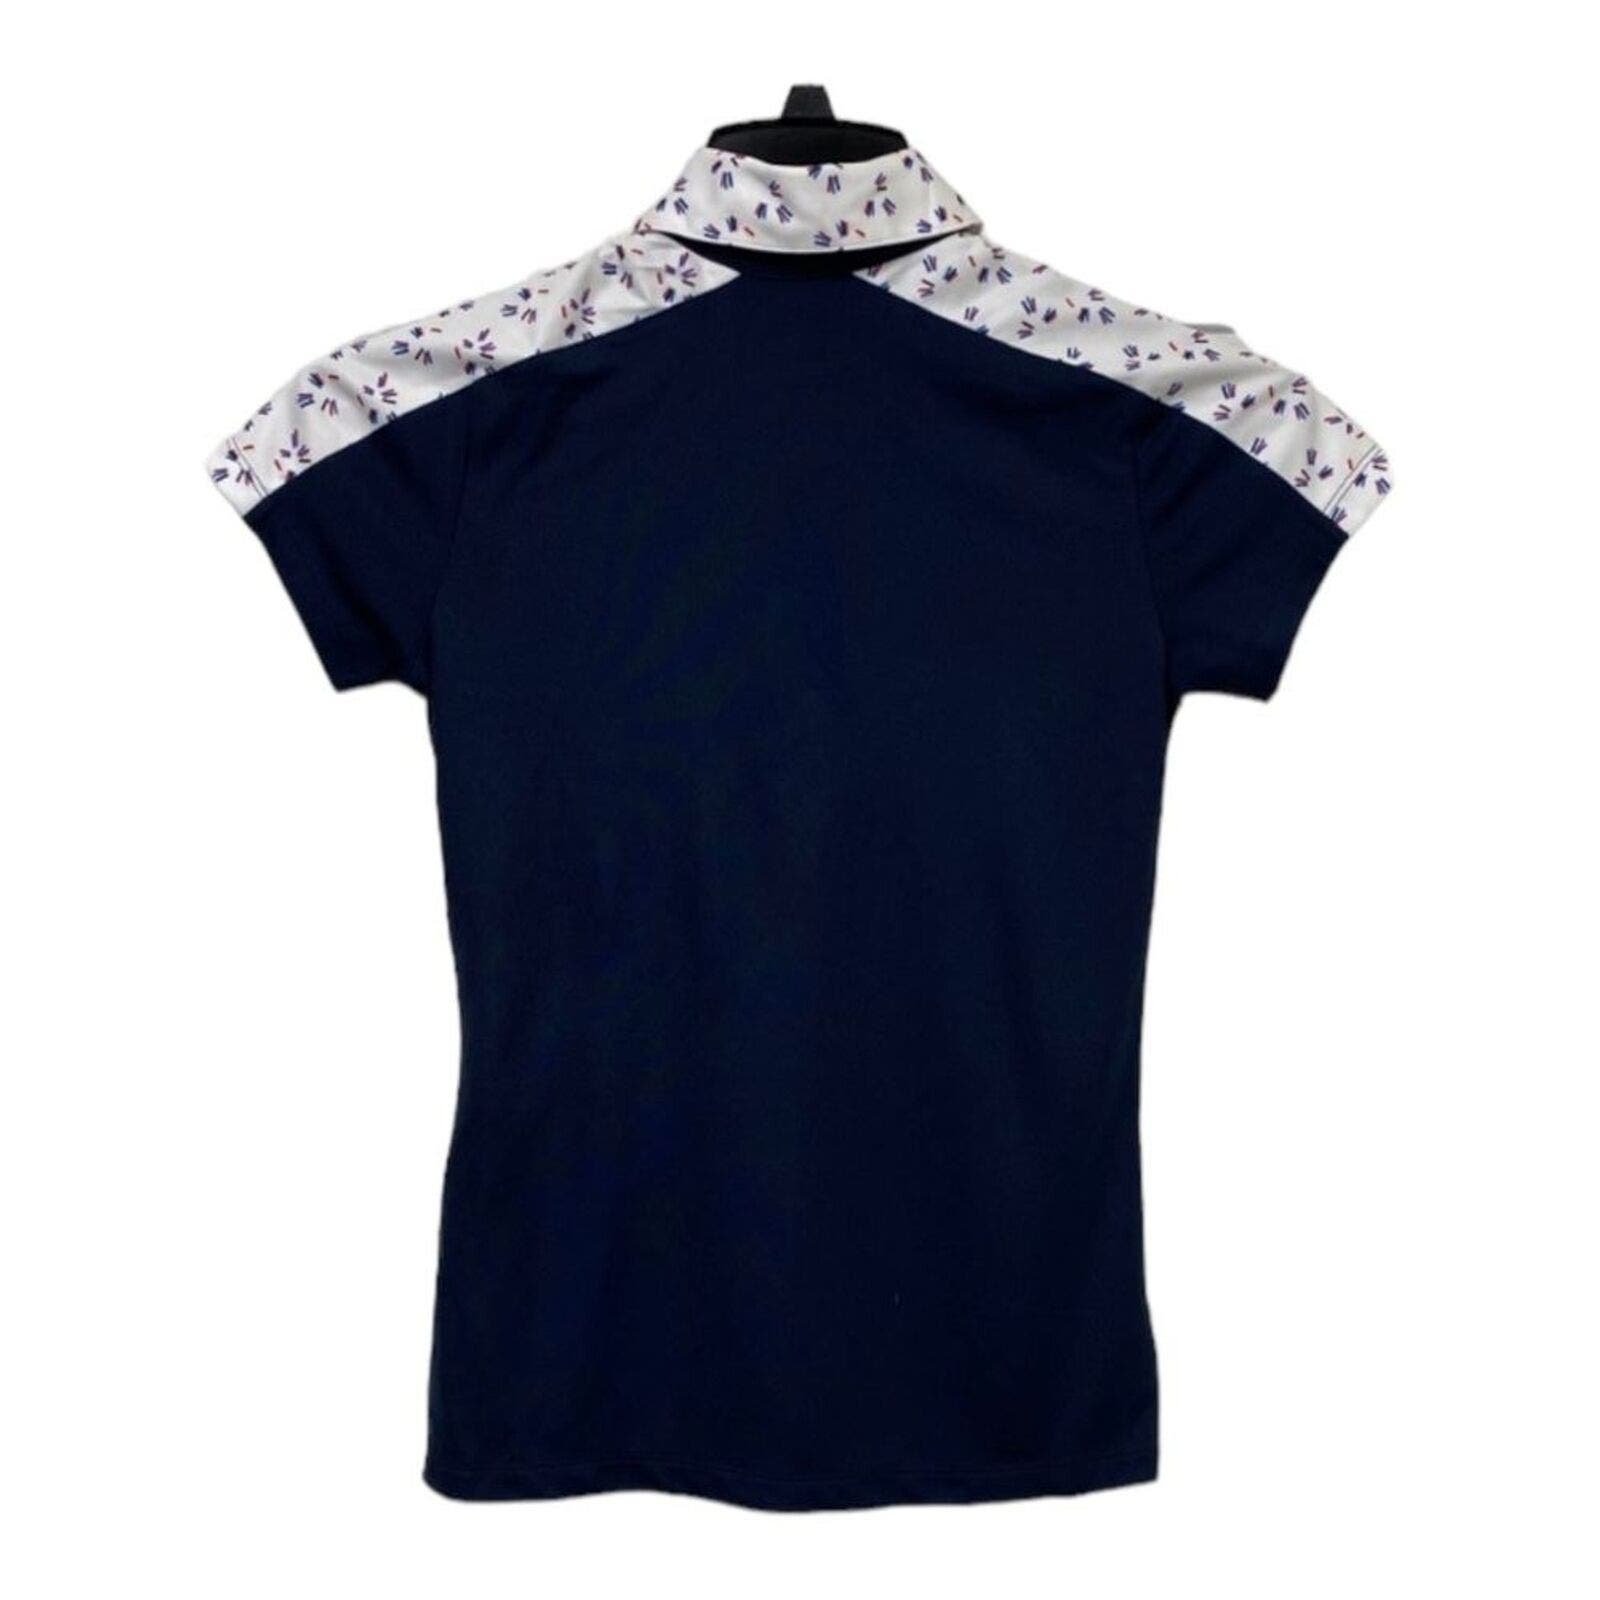 save up to 70% Lady Hagen Americana Polo Shirt Extra Small XS Short Sleeves Blue Golf SPF 25 l0bKFIHg2 Discount